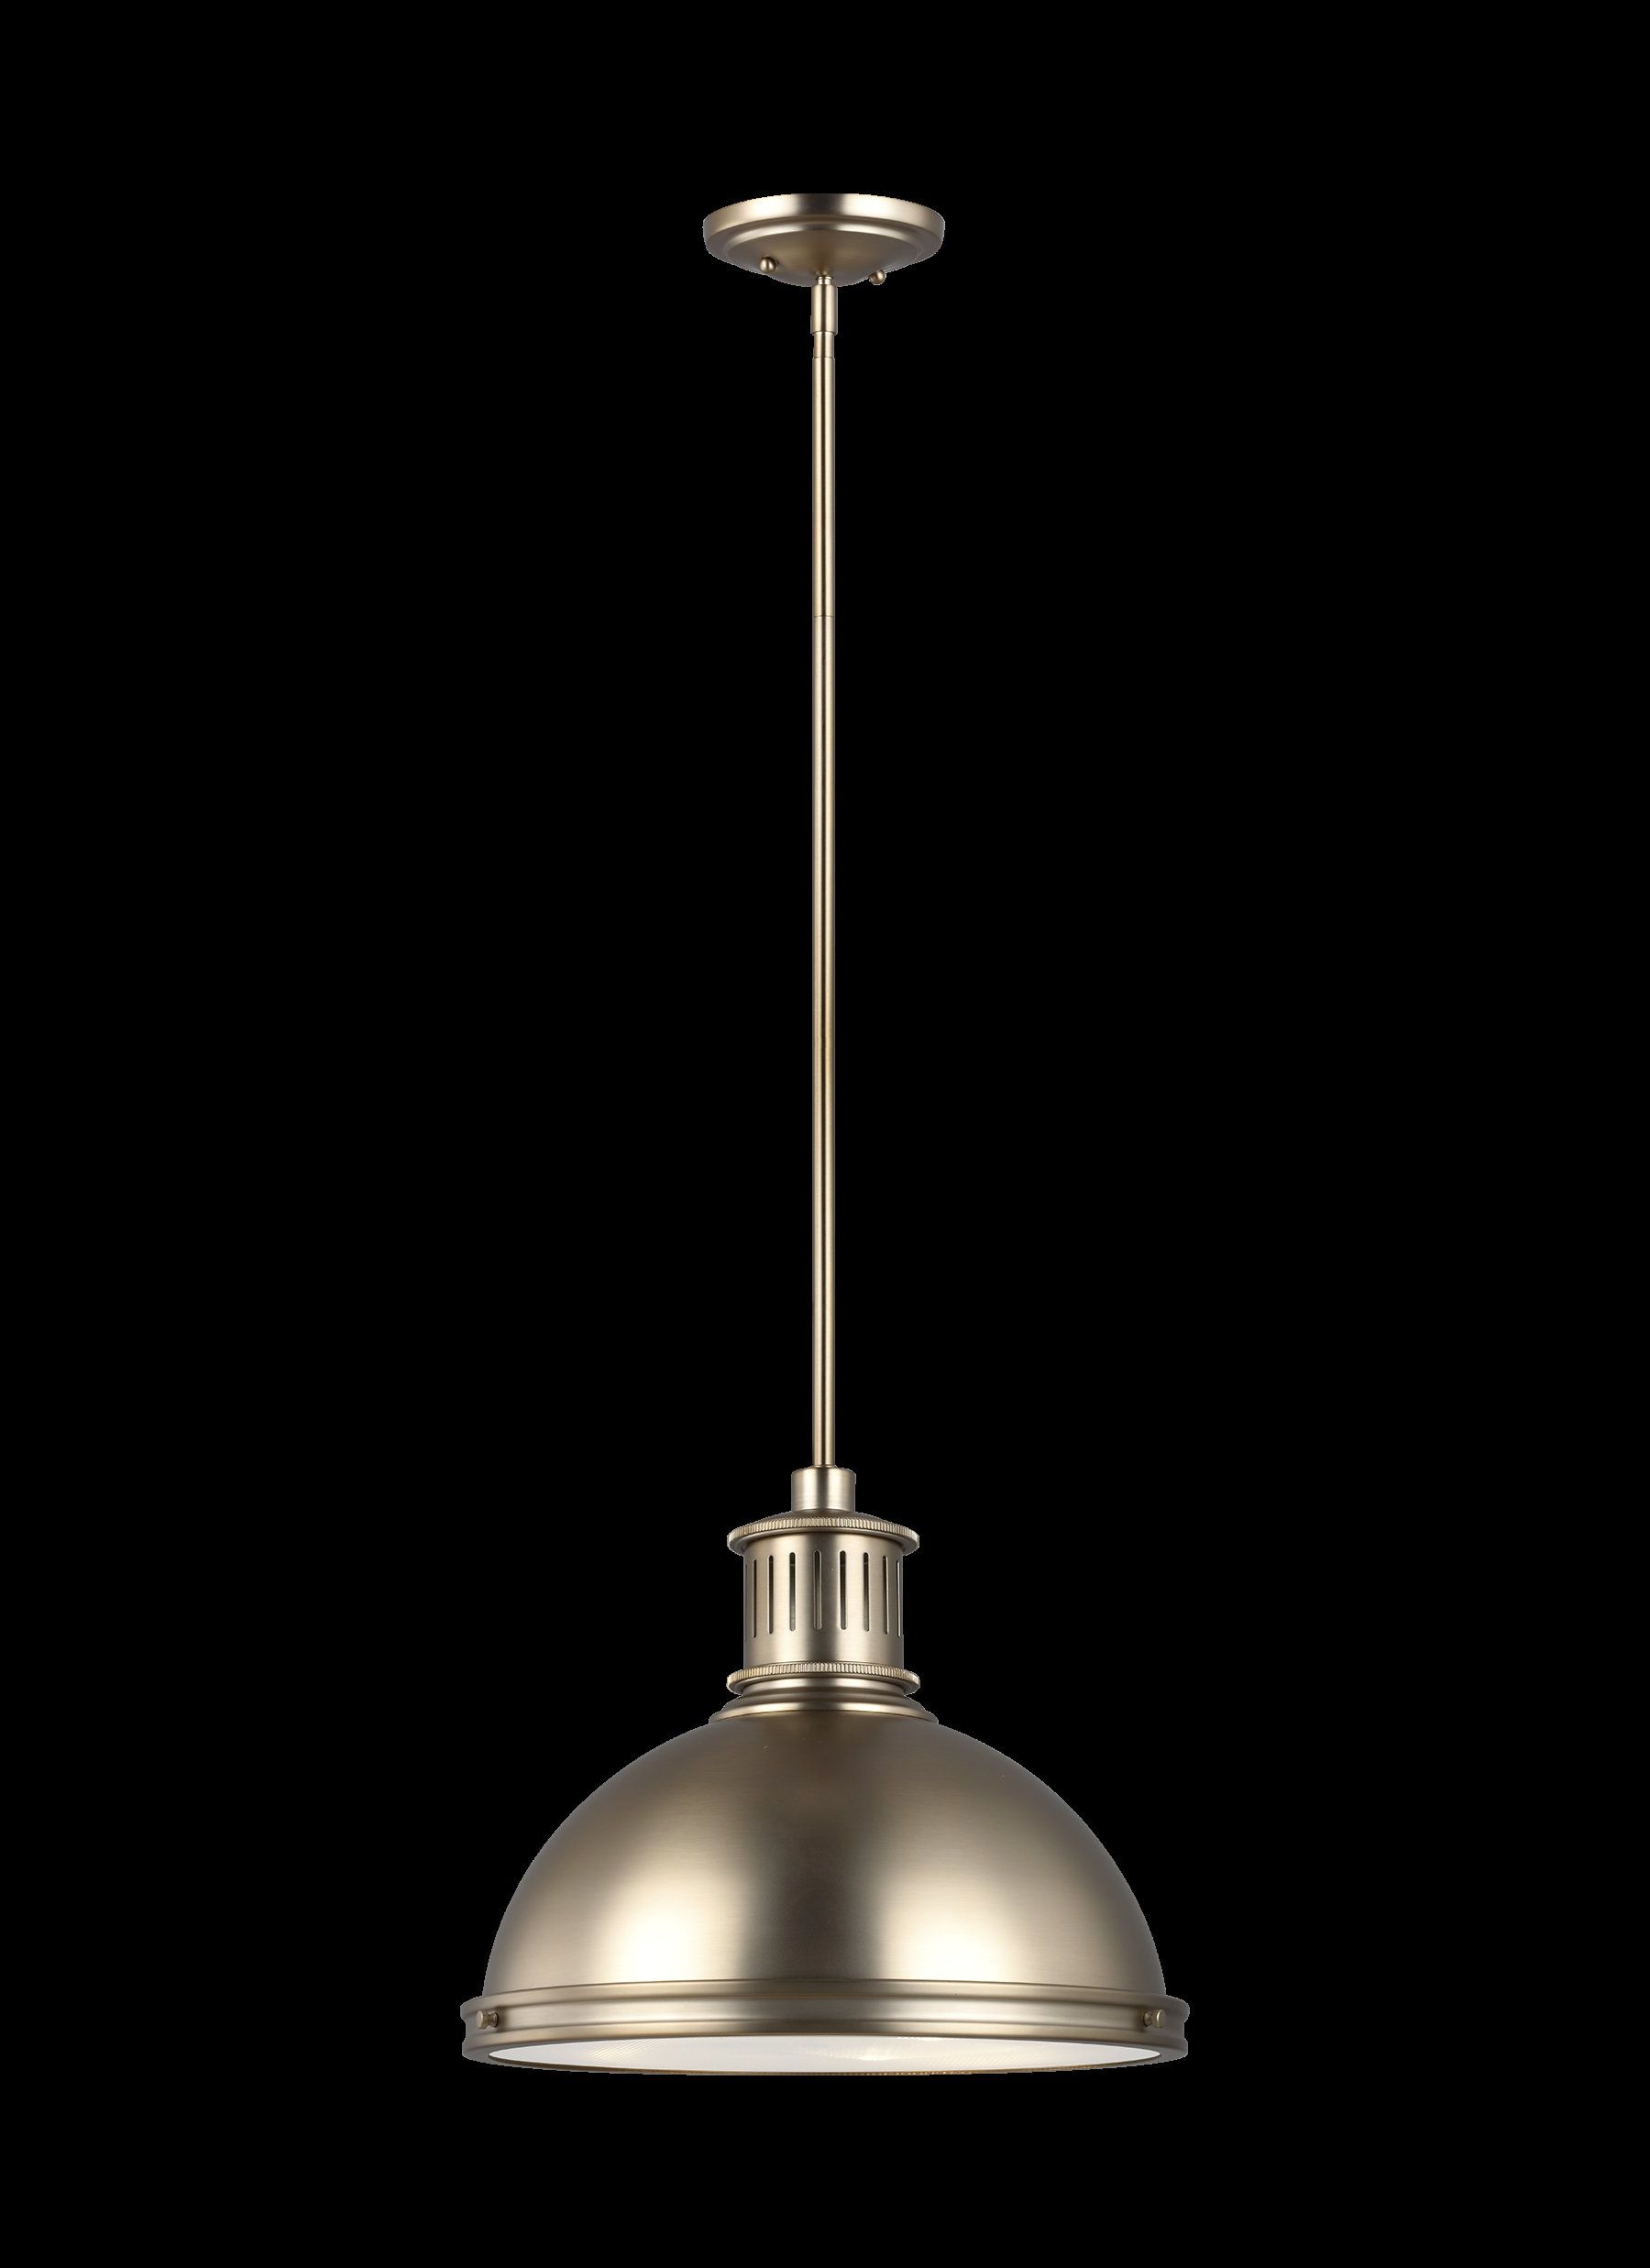 Recent Amara 3 Light Dome Pendant Intended For Amara 3 Light Dome Pendants (View 5 of 25)